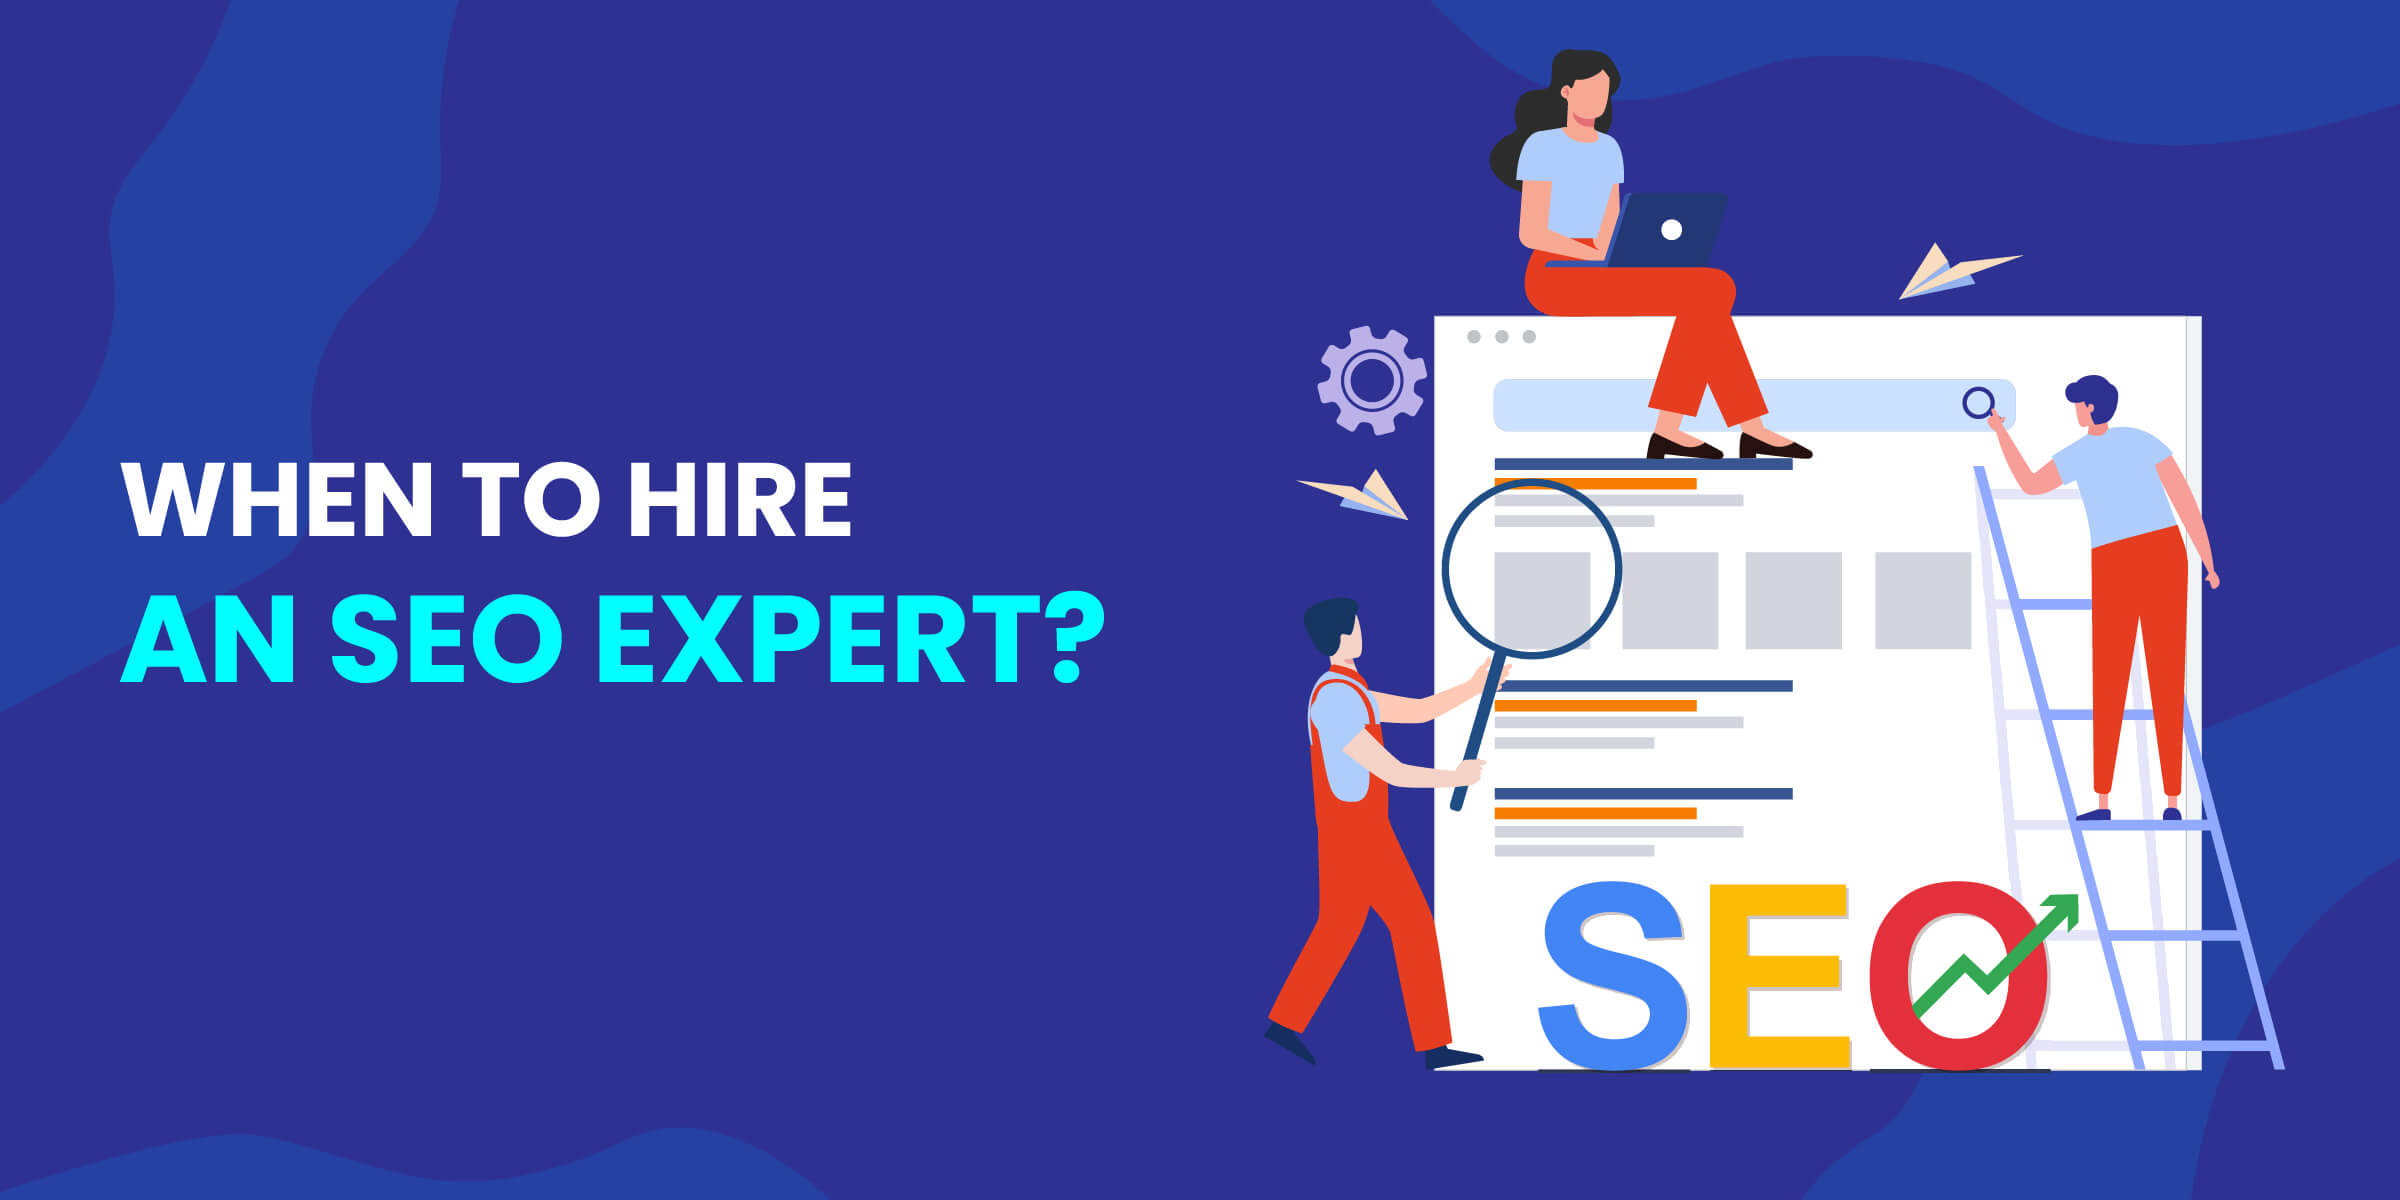 When to Hire SEO Expert